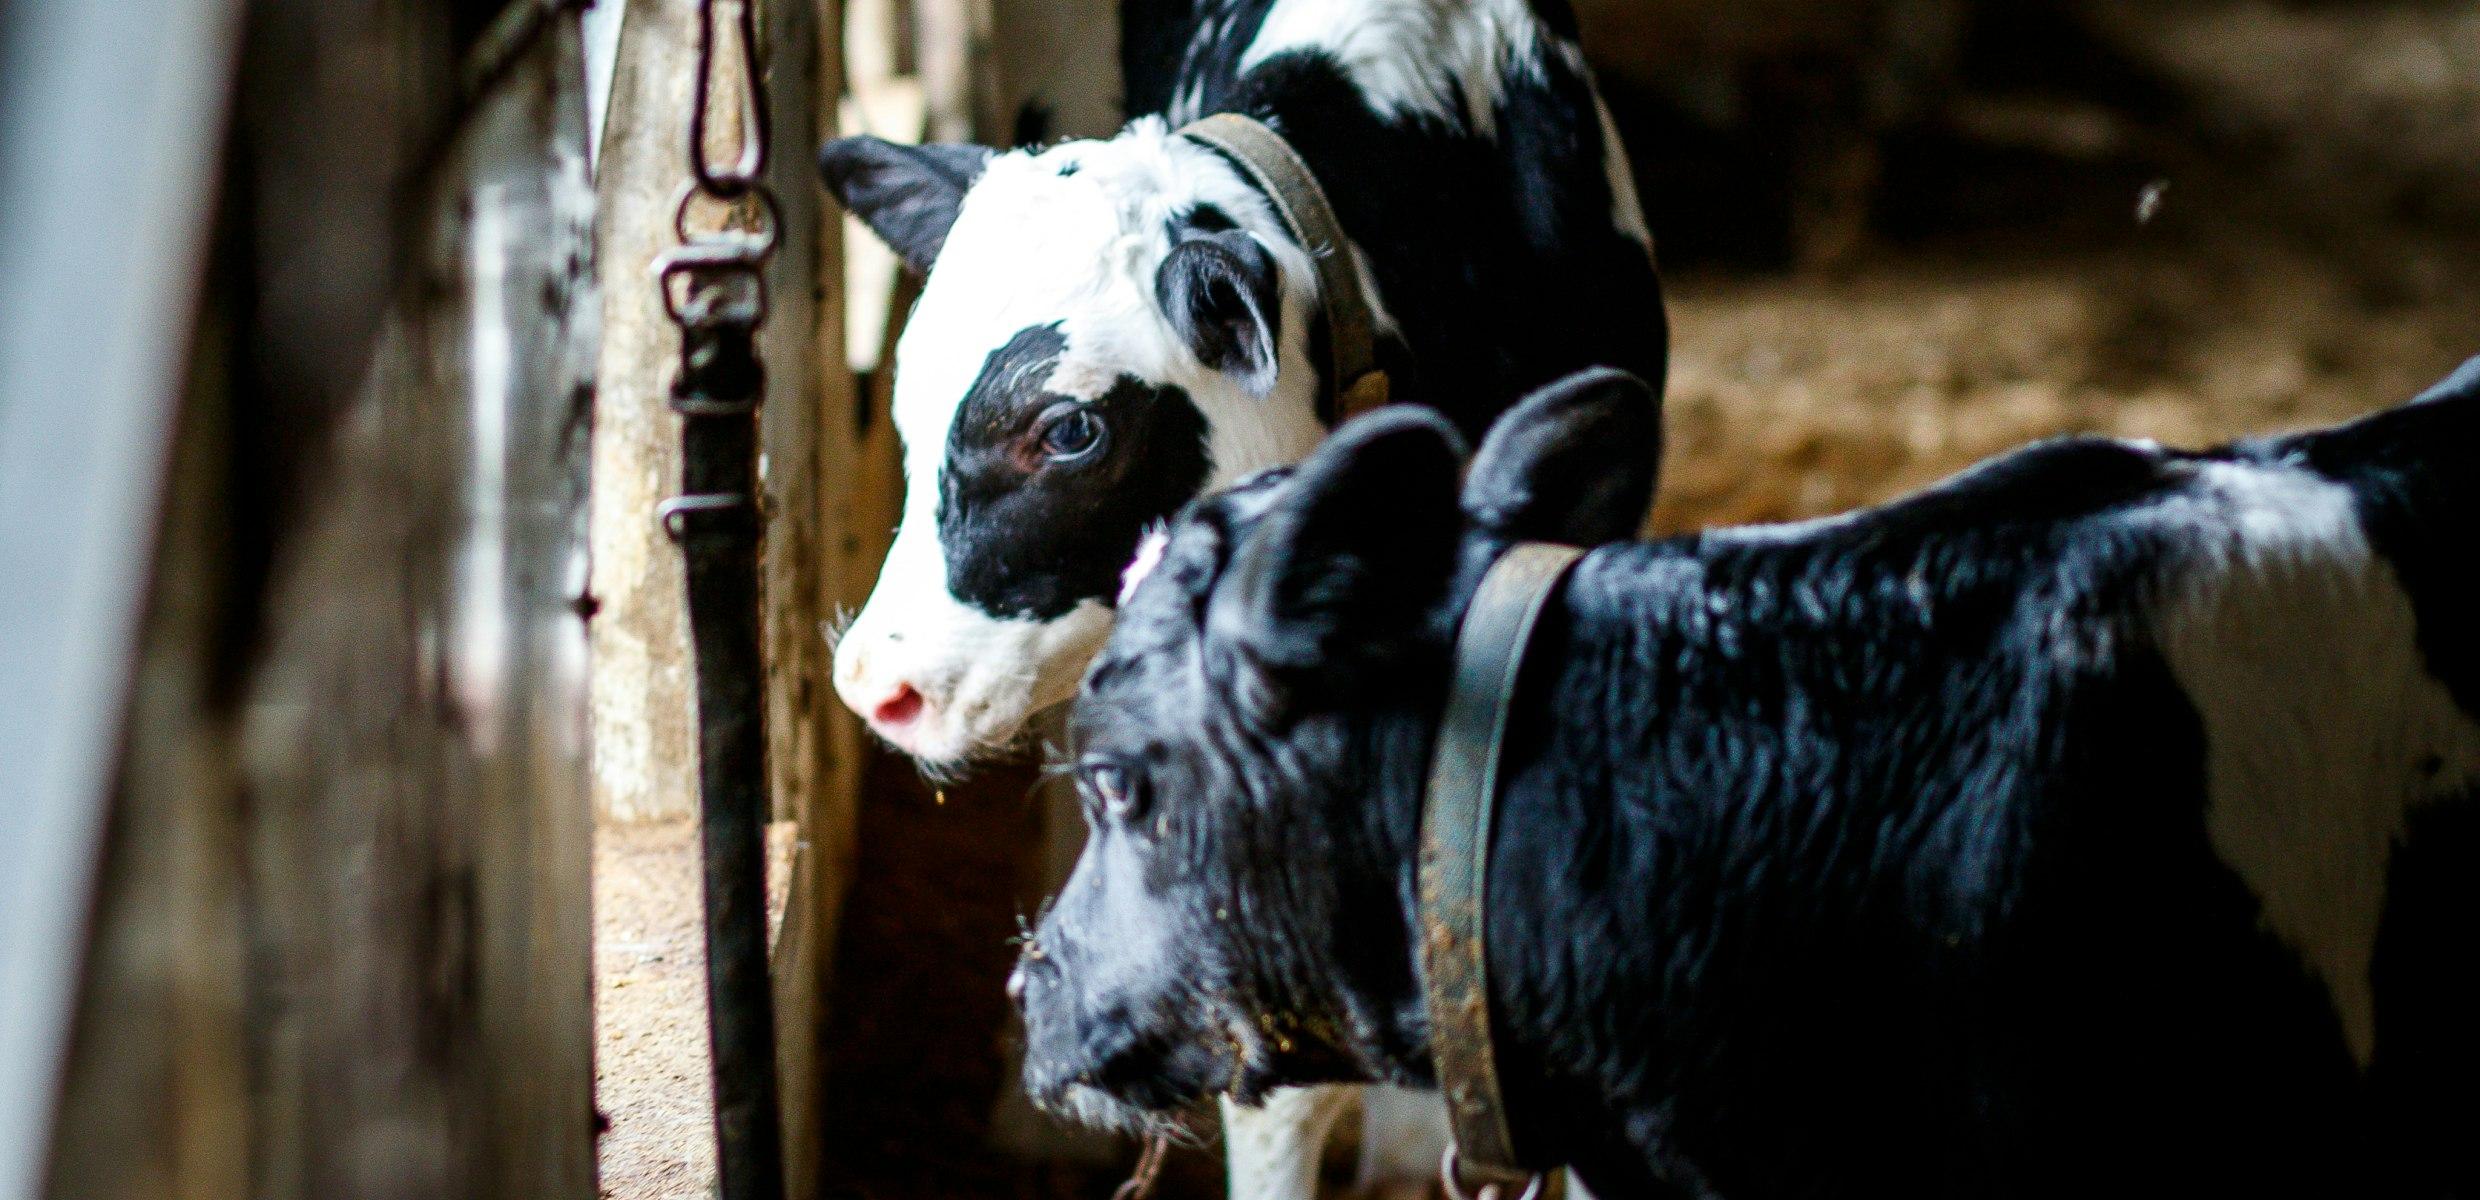 Dairy cows in a barn that practices manure management in regenerative agriculture